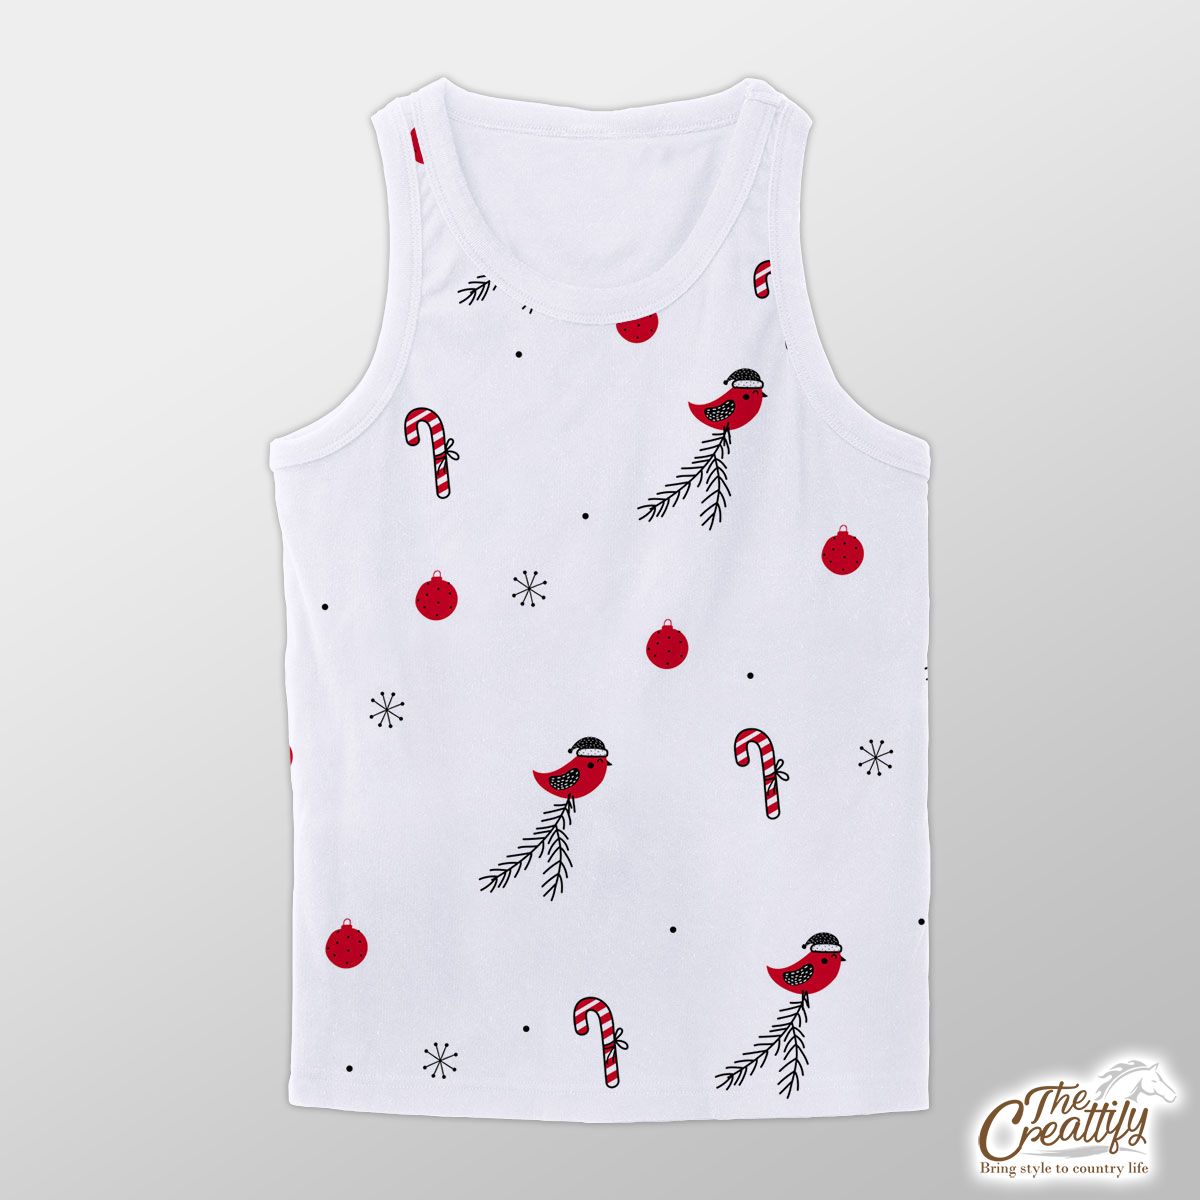 Cardinal Bird With Santa Hat, Candy Canes, Christmas Balls And Snowflake Clipart Seamless White Pattern Unisex Tank Top